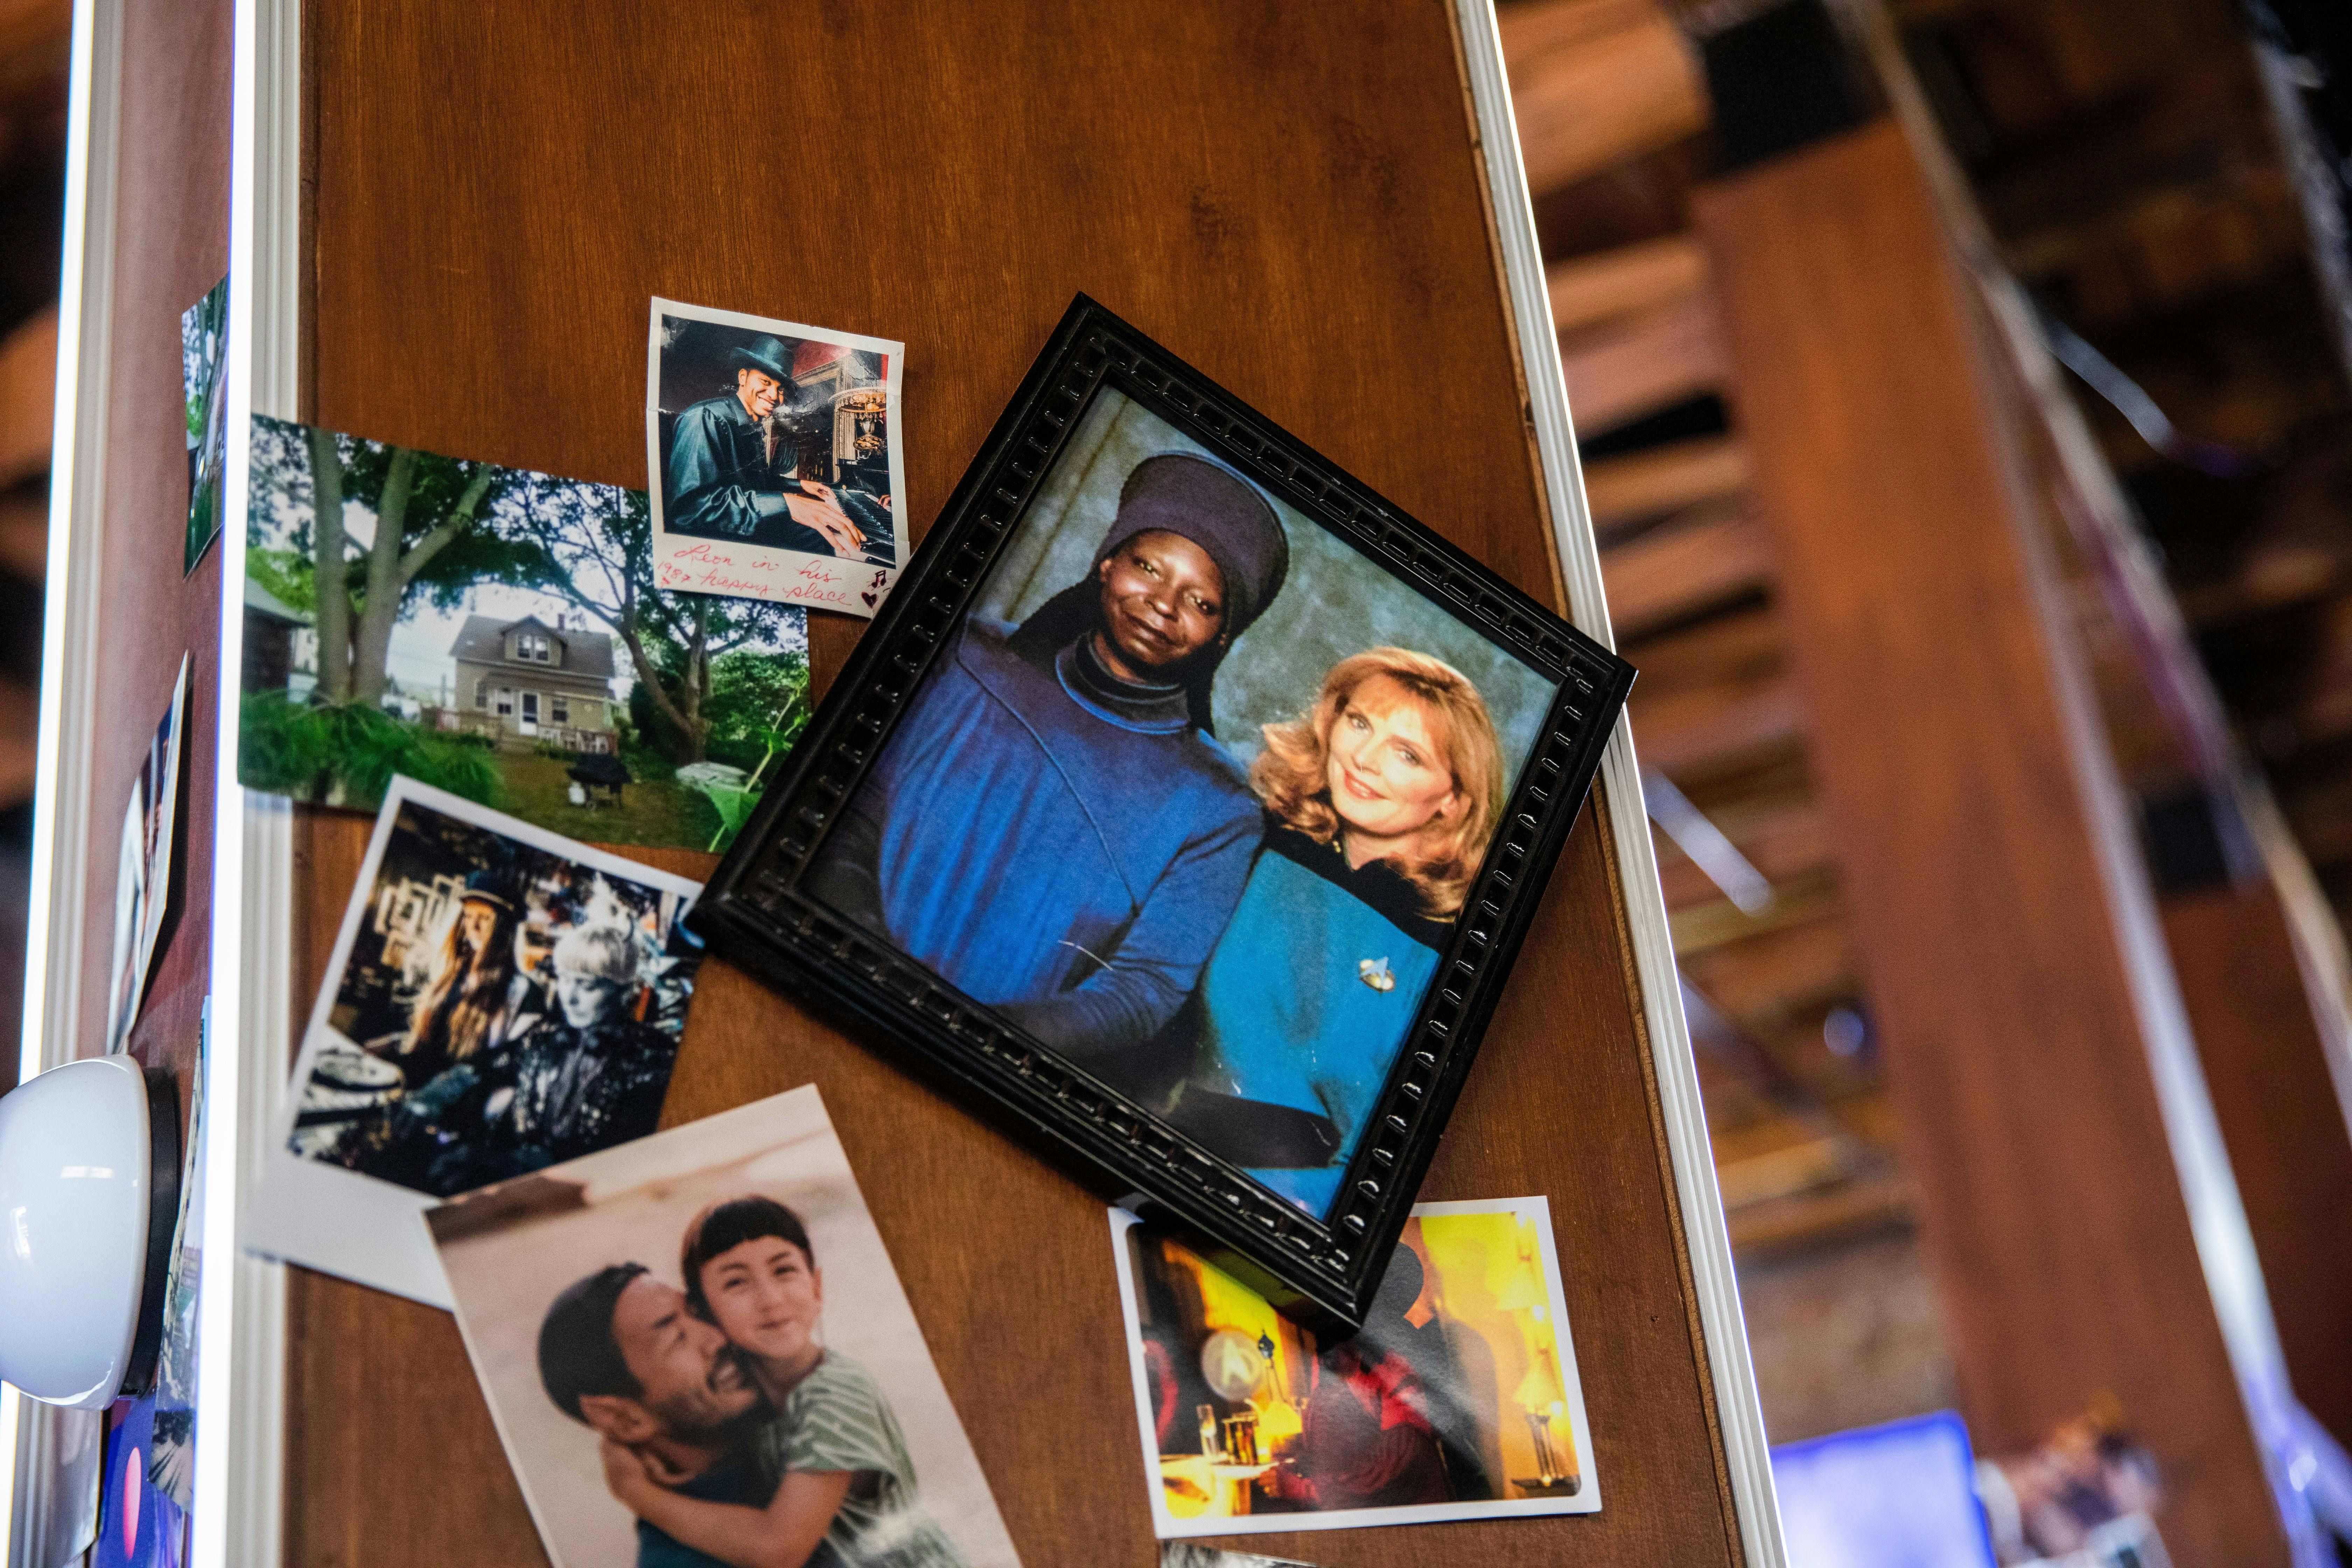 Photos decorate the walls of 10-Forward, including a picture of Guinan and Dr. Crusher.